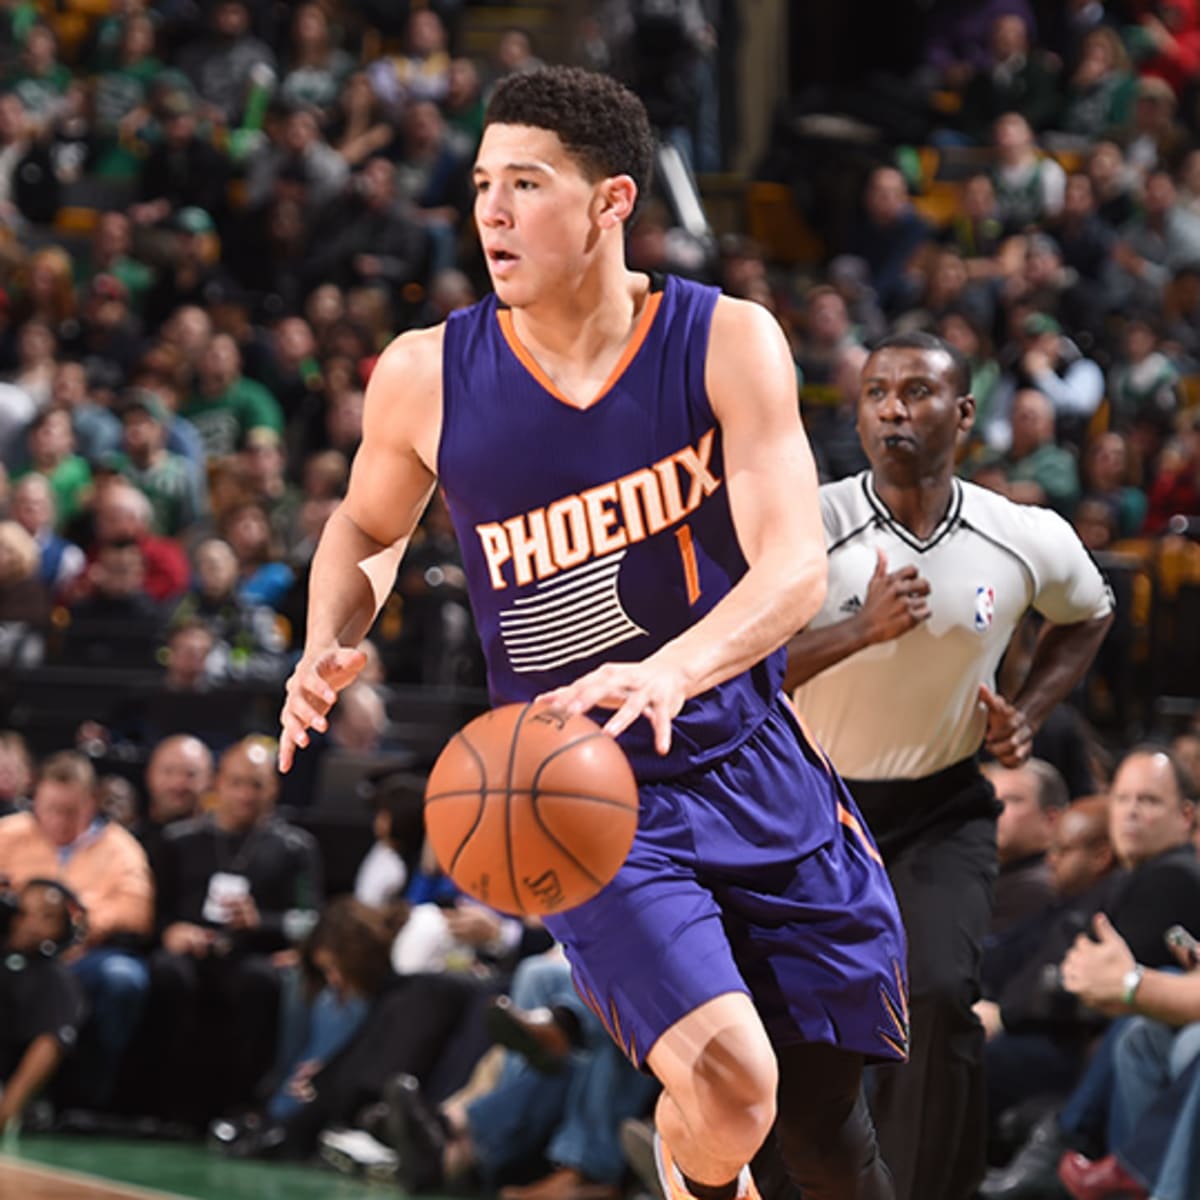 Kentucky's Devin Booker Is Living His Father's Dream